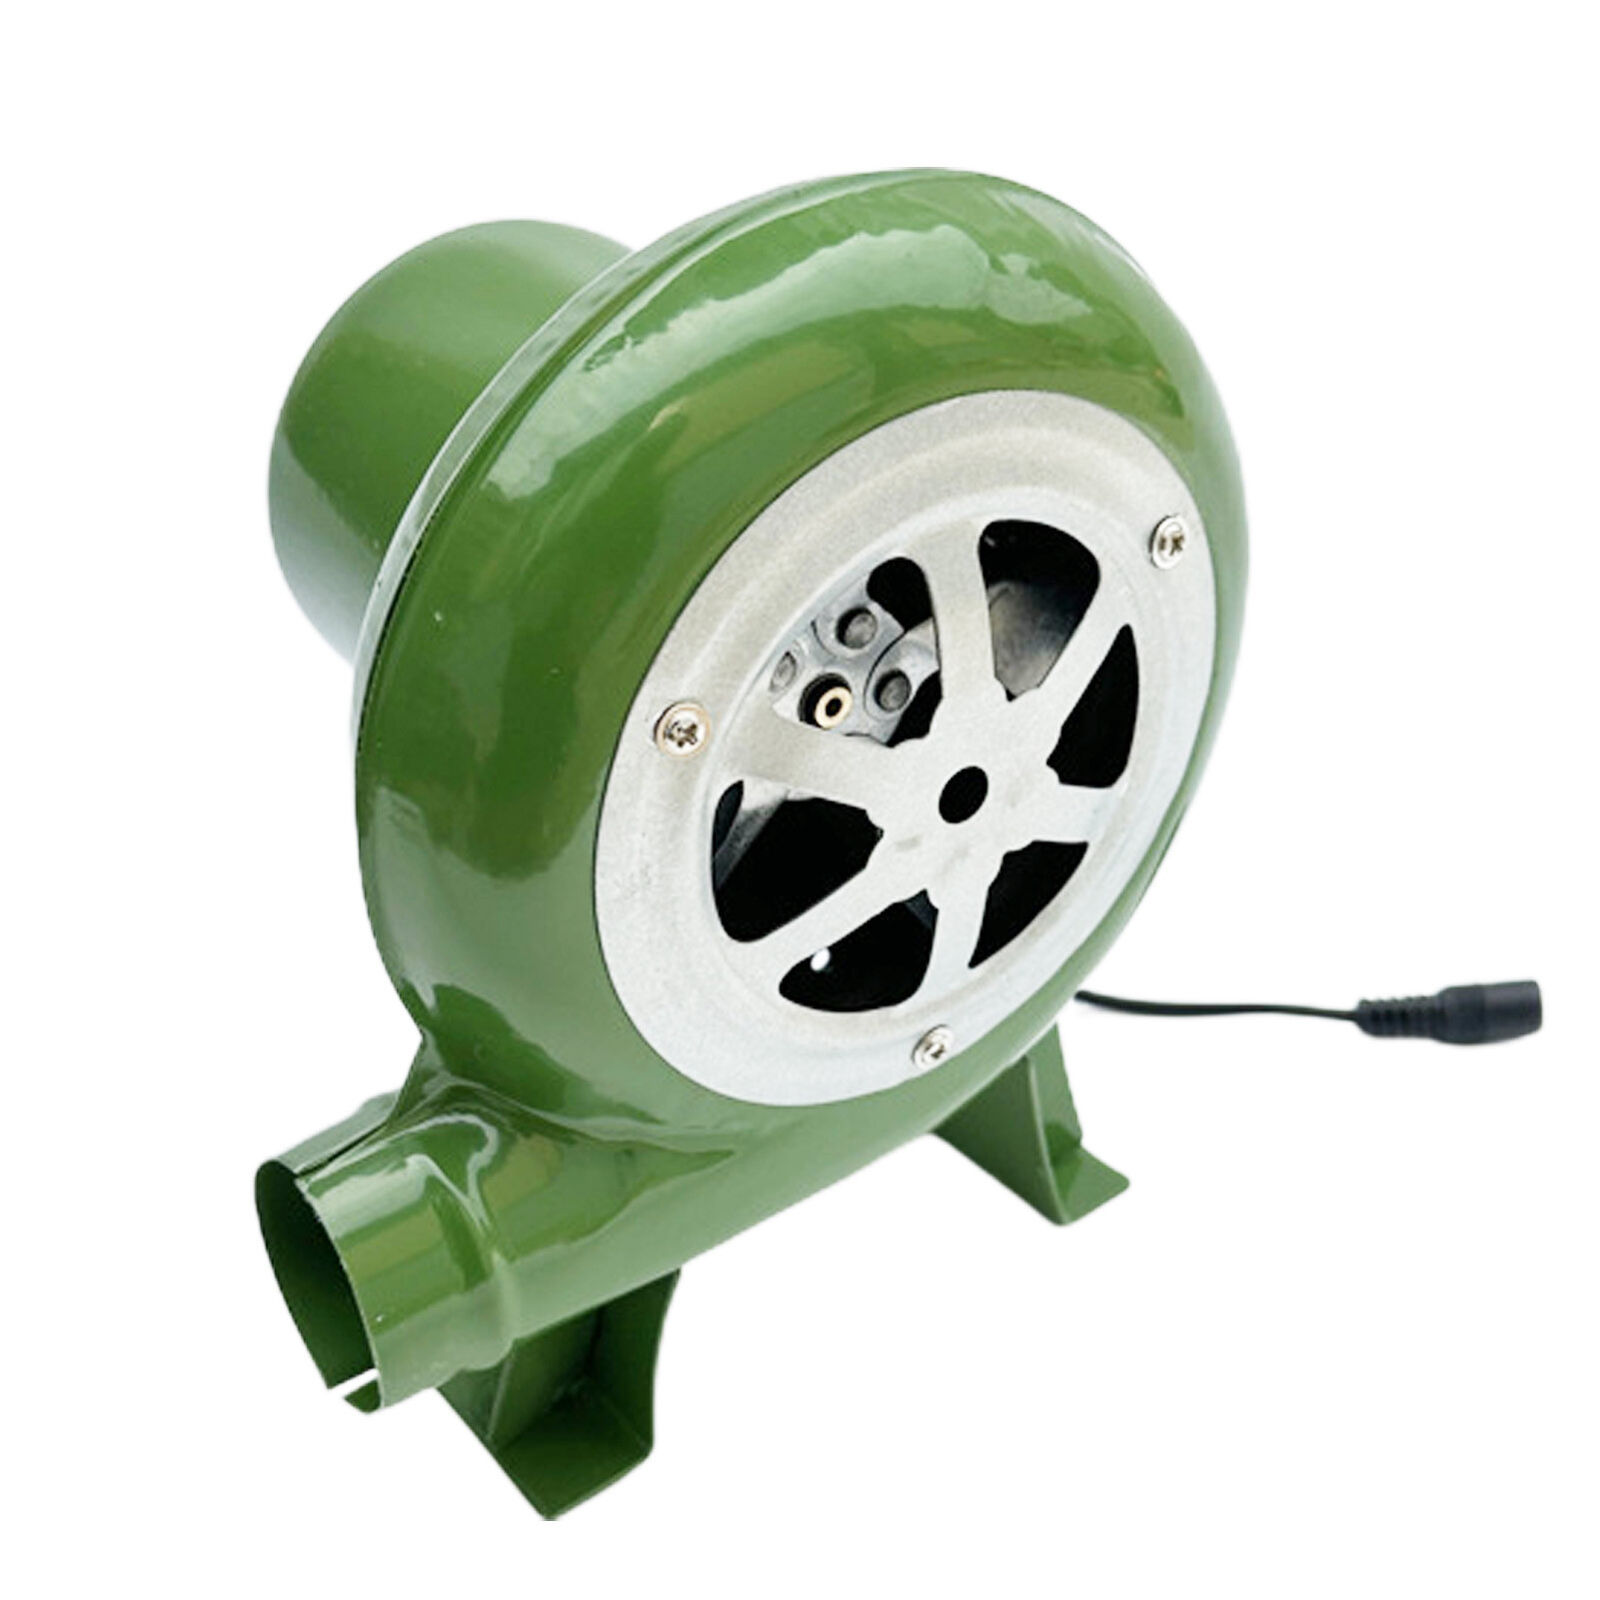 Ac/DC Blower 12V Variable Speed Blower Exquisite Electric Blower Fan30/40/60/80W